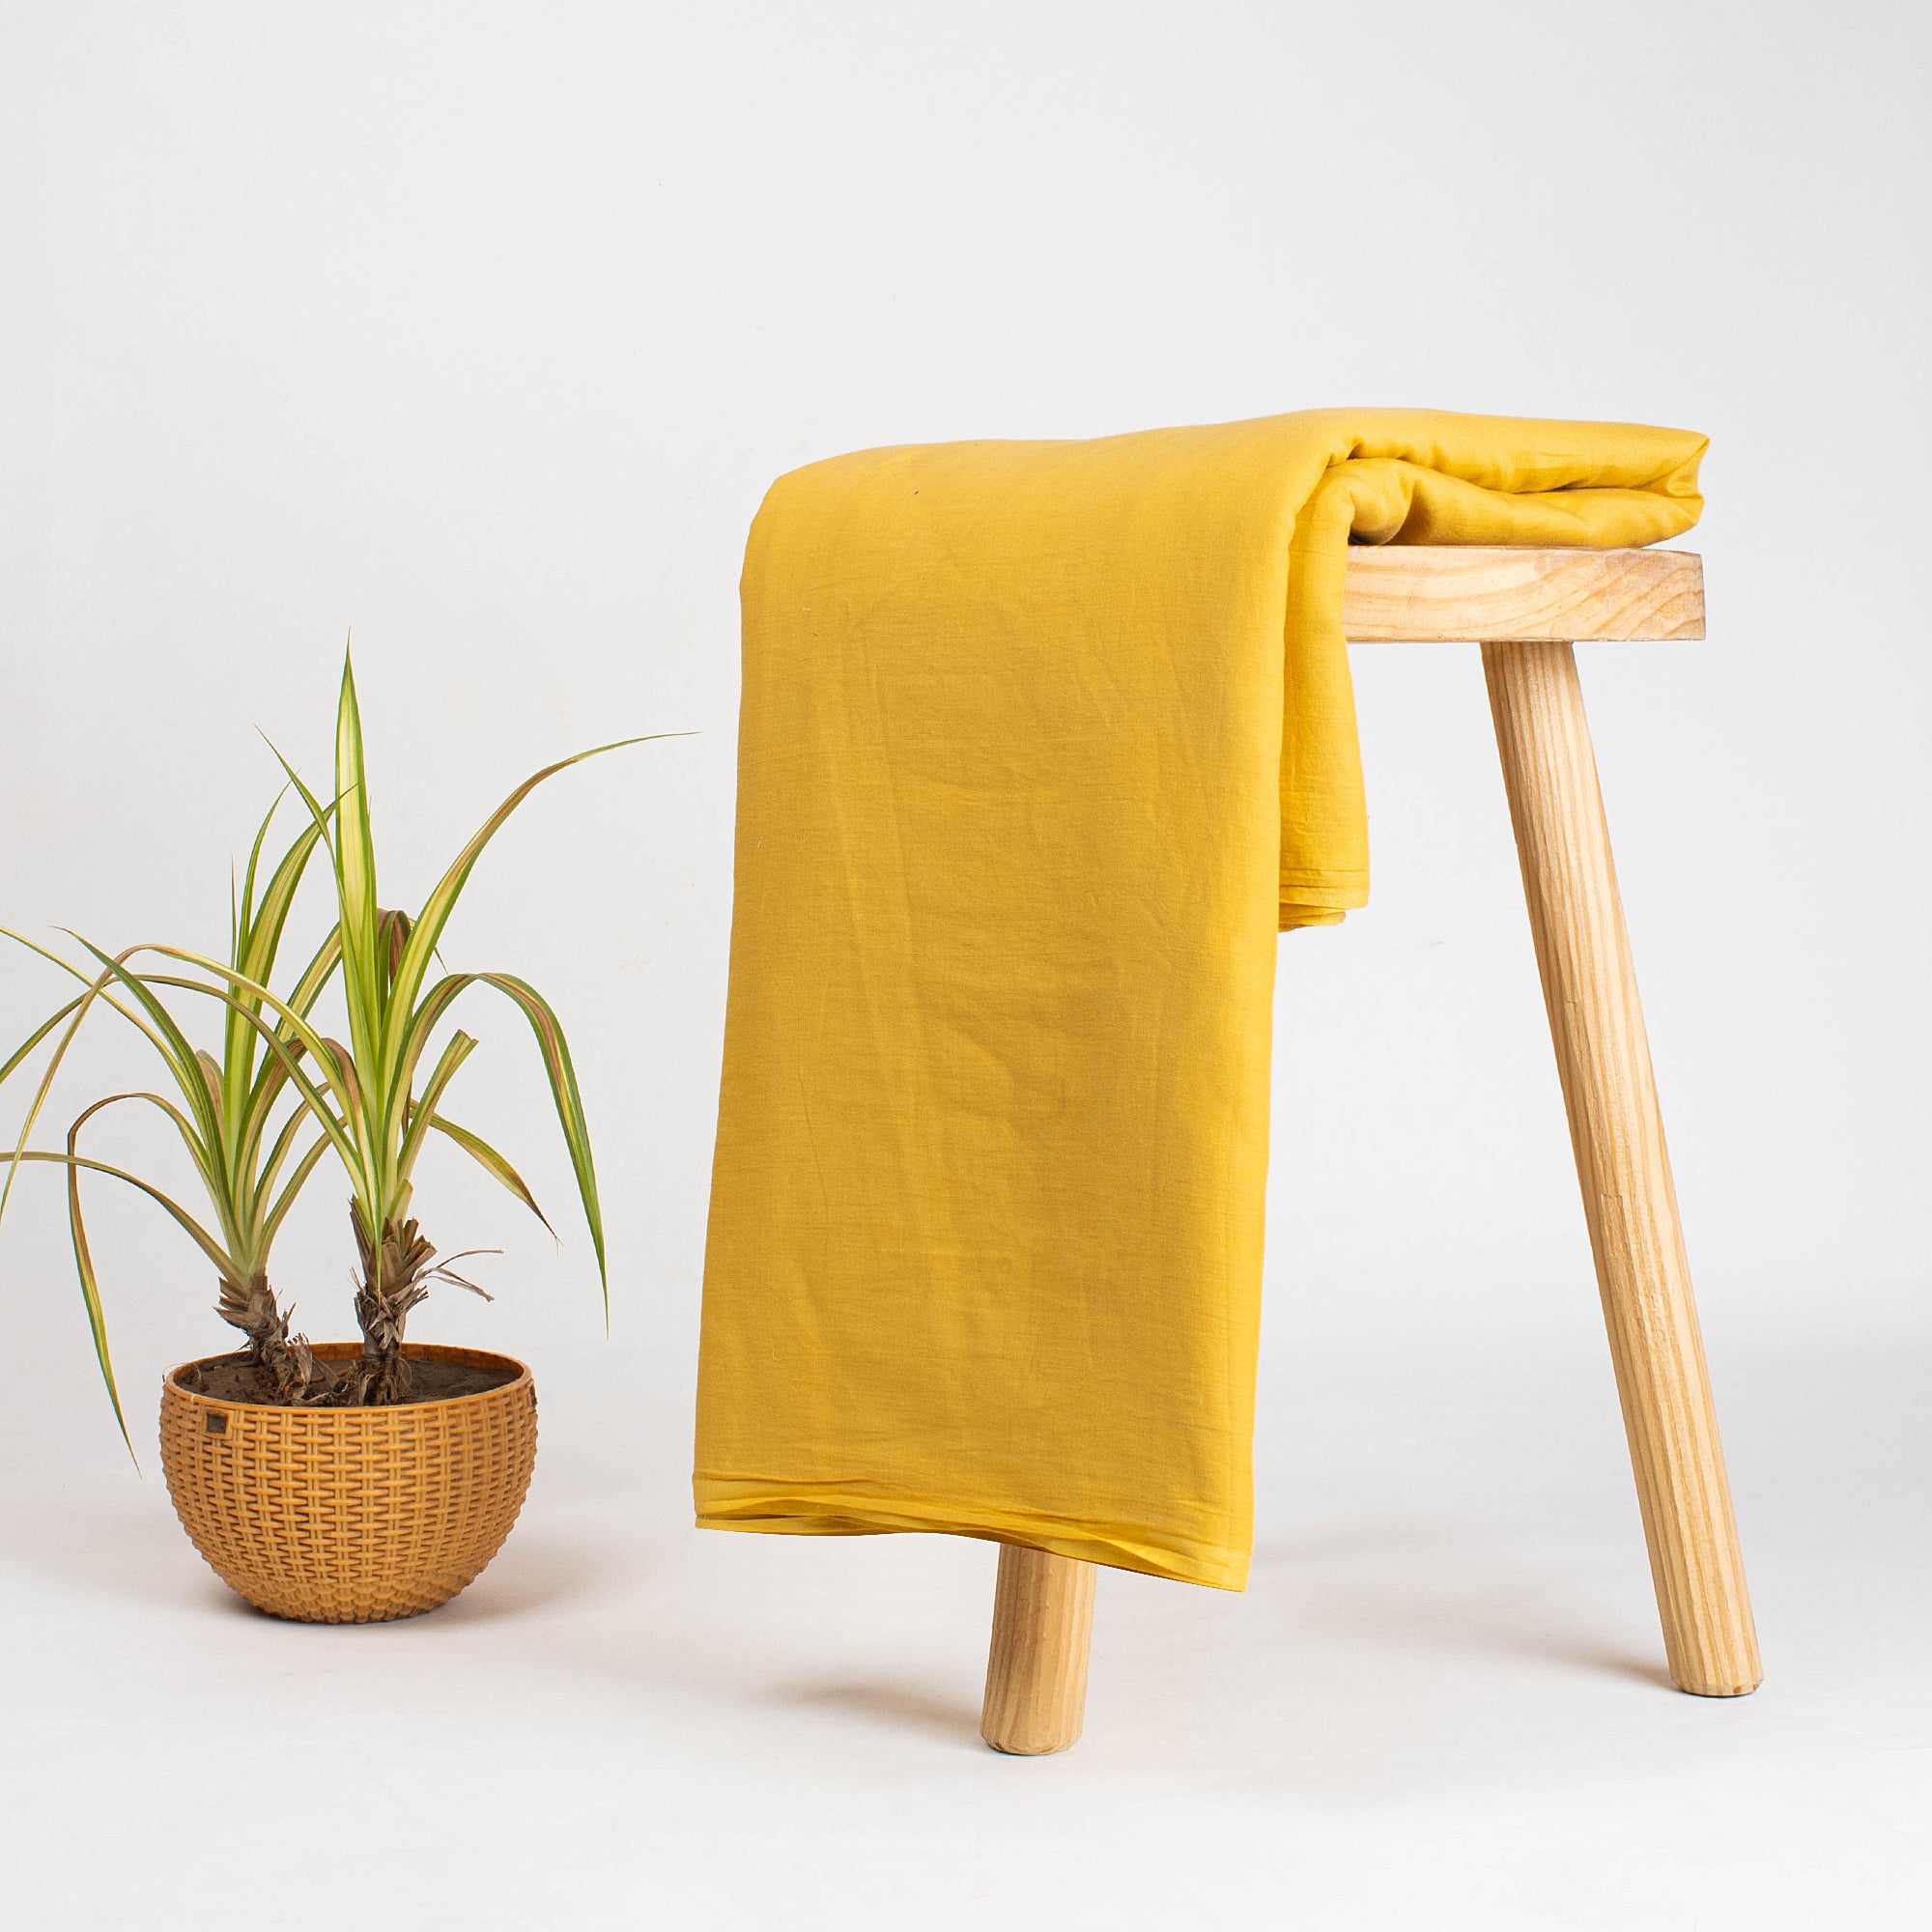 Yellow Solid Cotton Fabric